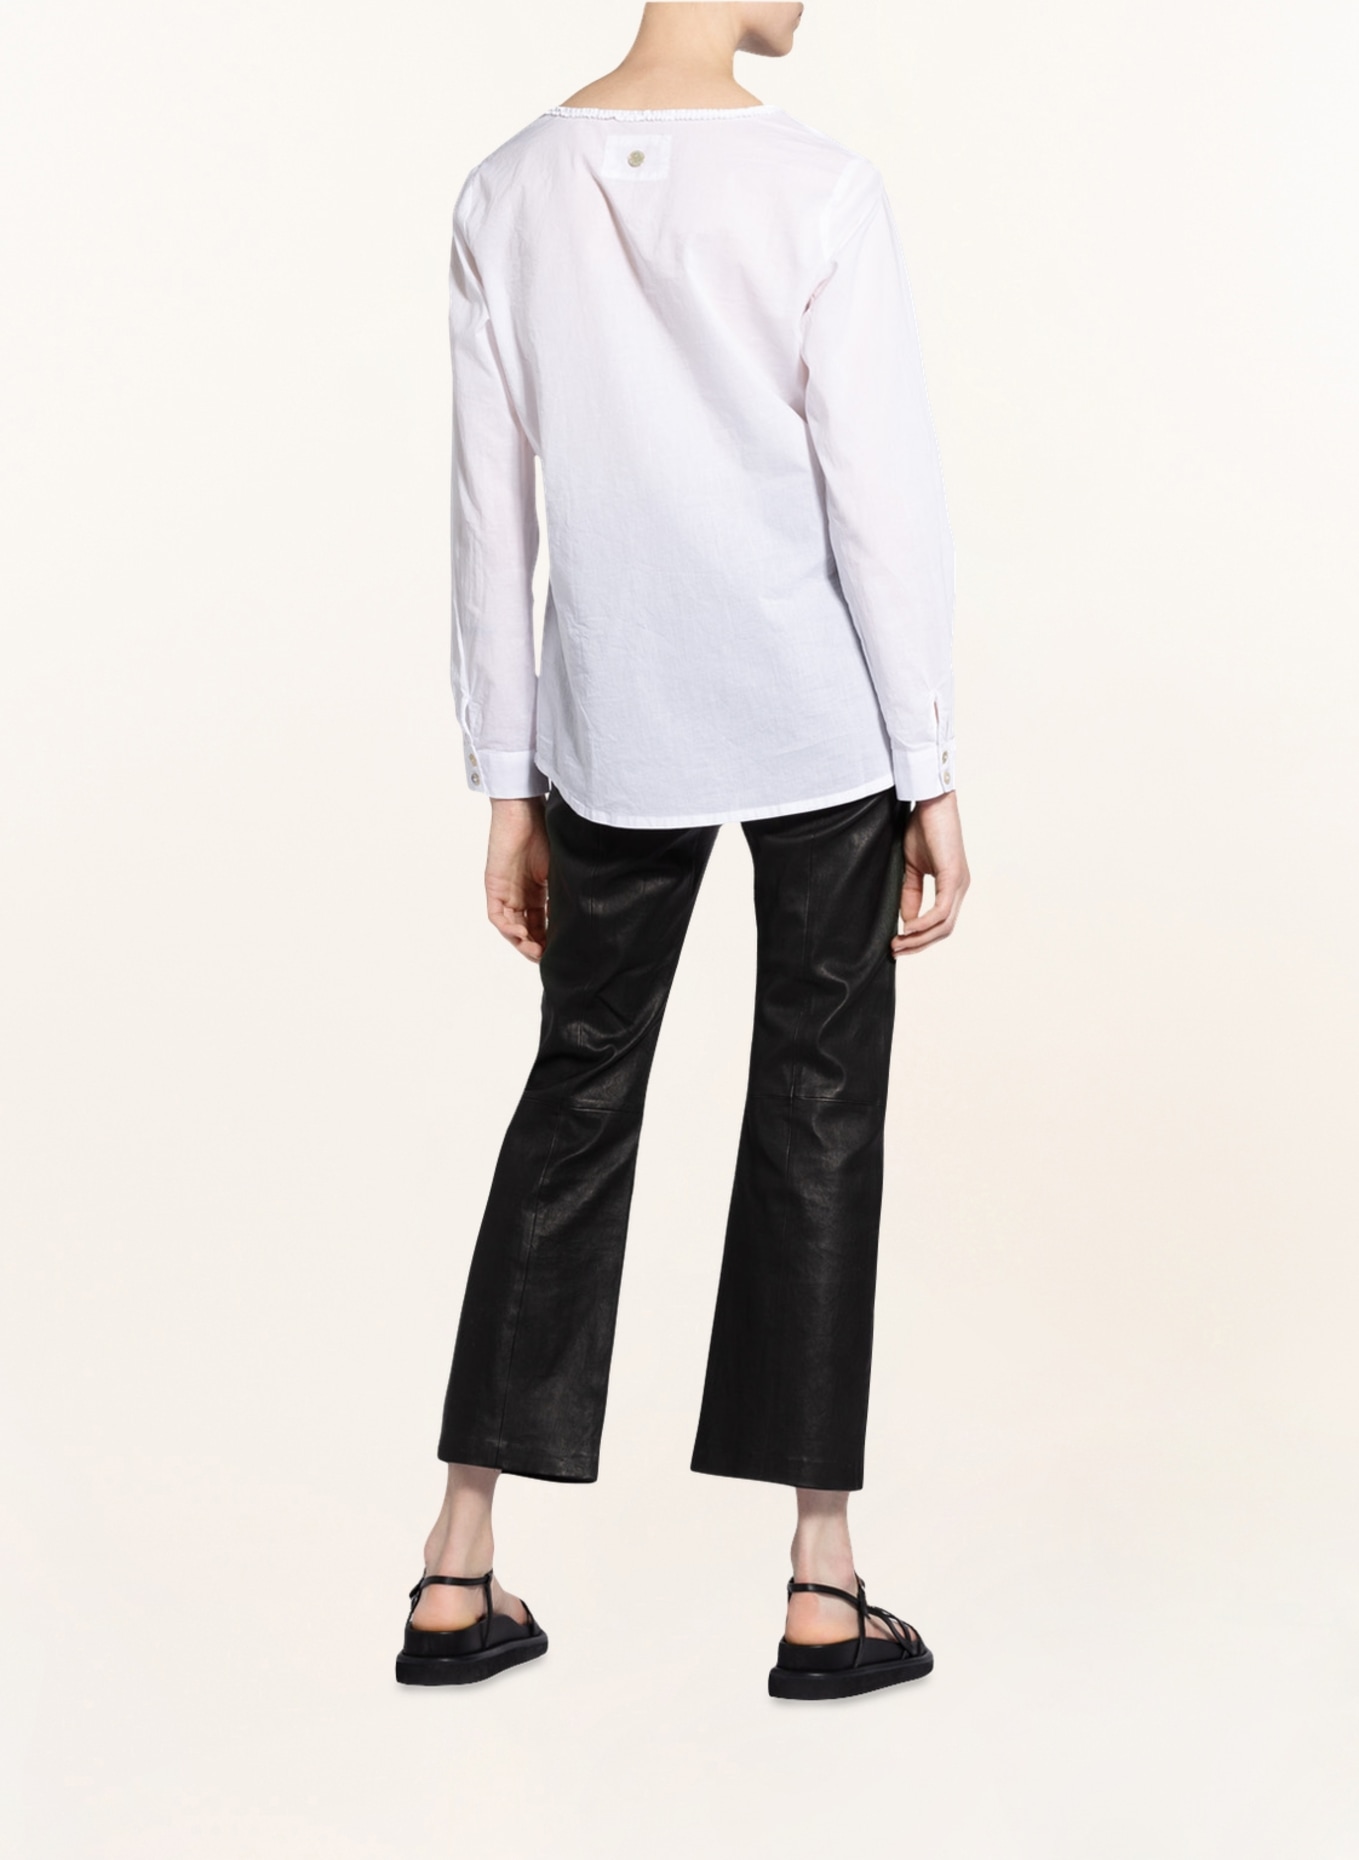 LIEBLINGSSTÜCK Blouse-style shirt ROSEMARIE with ruffle trim, Color: WHITE (Image 3)